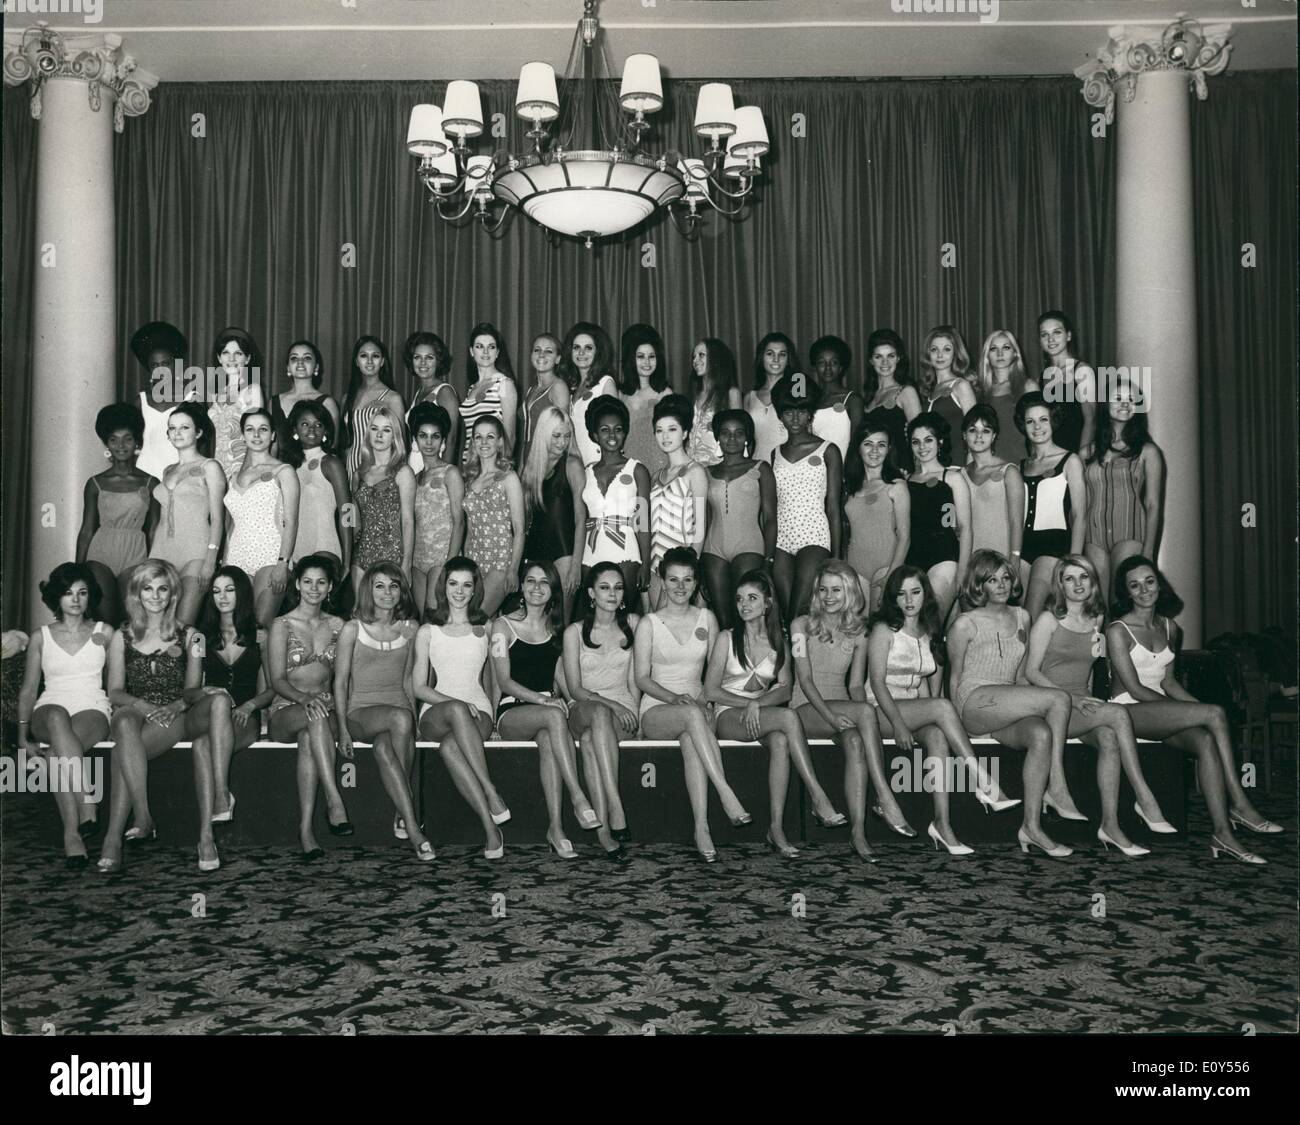 Nov. 11, 1968 - Miss World Contestants in Swimsuits: Many of the Miss World contestants were this afternoon photographed wearing their swimsuits, at the Waldorf Hotel, London. The contest takes place next Thursday (Nov 14), at the Lyceum in London. Photo shows (L to R - Front Row): Miss Argentine; Miss Australia; Miss Austria; Miss Austria; Miss Bahamas; Miss Belgium; Miss Canada (Dominion of); Miss Chile; Miss Colombia; Miss Costa Rica; miss Cyprus; Miss Denmark; Miss Ecuador; Miss Finland, Miss France and Miss Germany; (L to R - Middle Row): Miss Ghana; Miss Gibraltar; Miss Greece; Miss Stock Photo